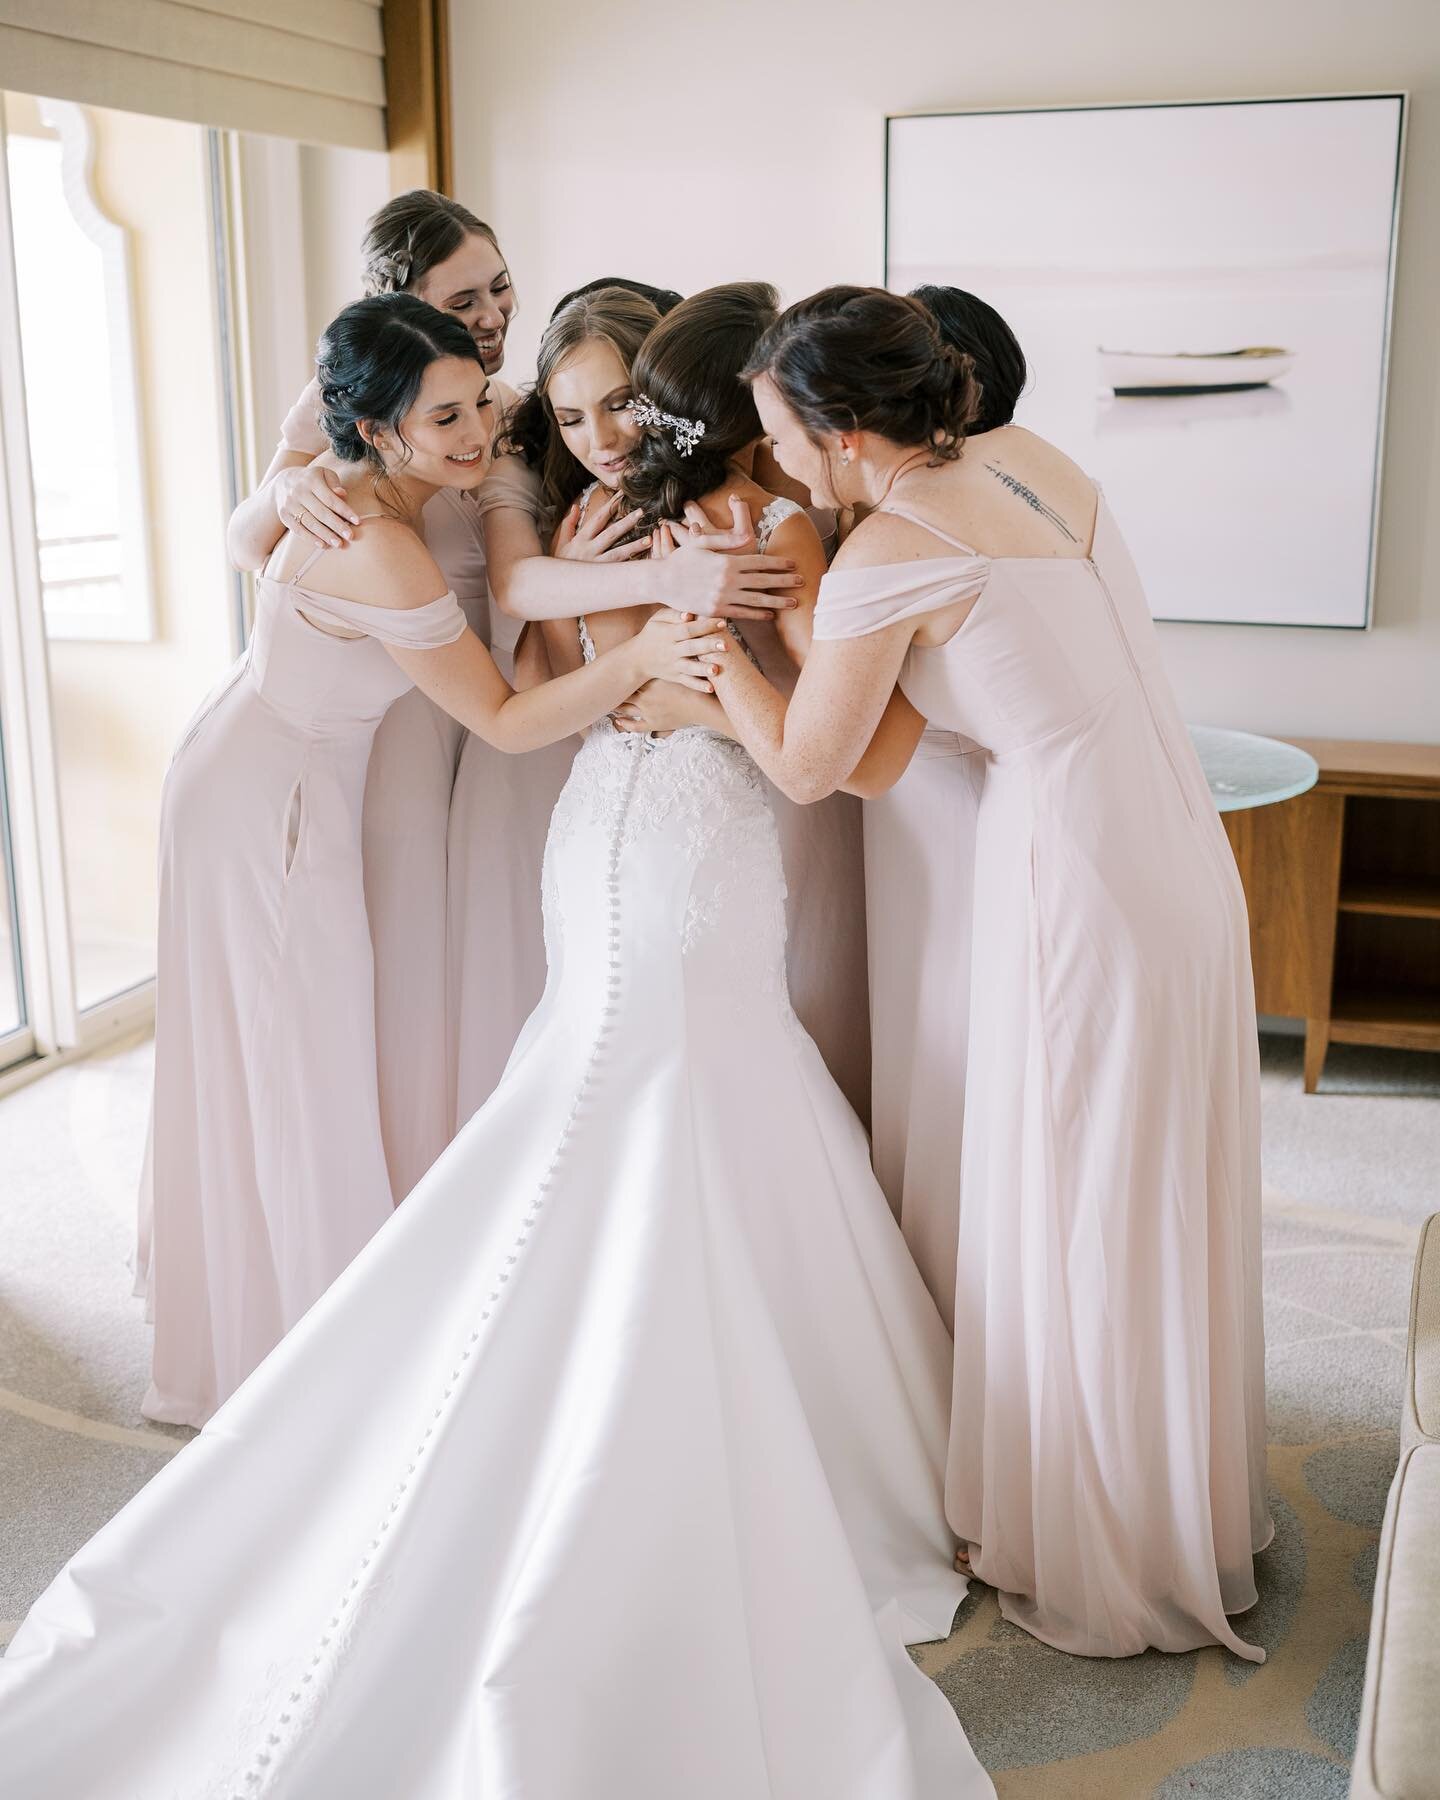 Bridesmaids are not just for the big day, but for all of life's moments.